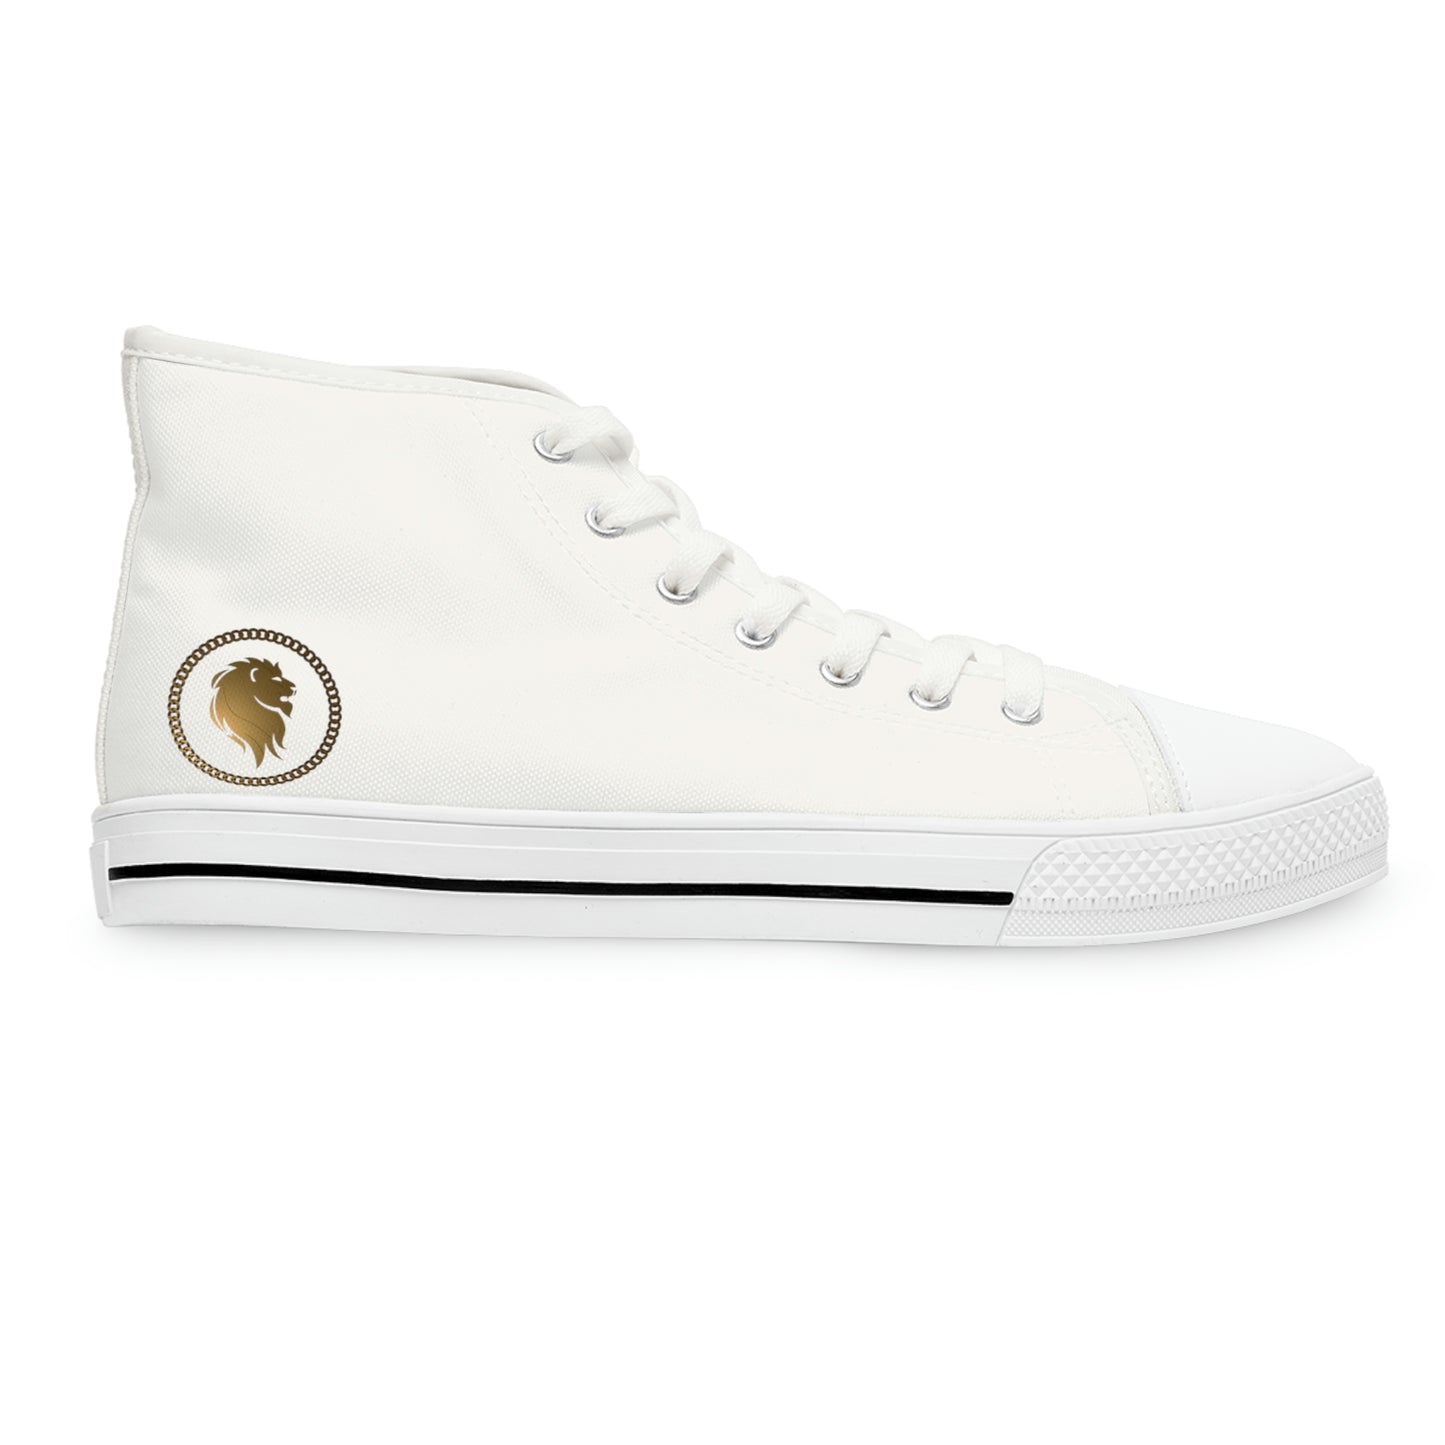 White/Gold Women's High Top Sneakers